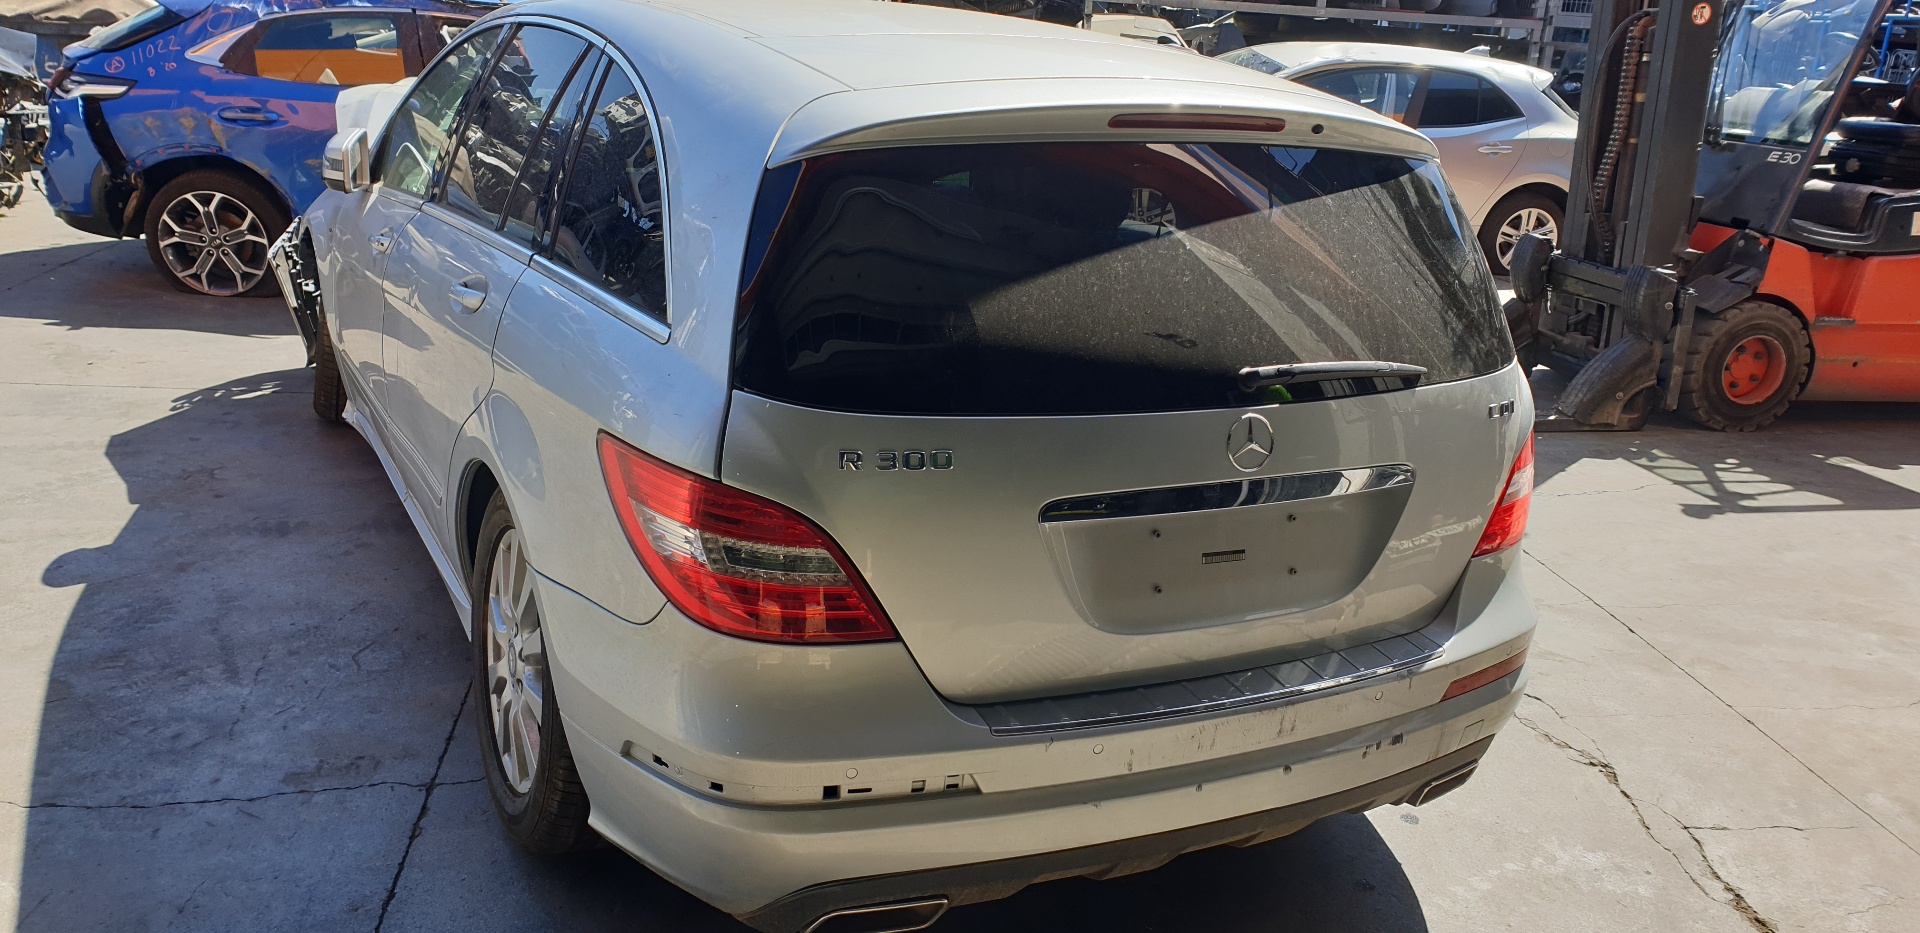 MERCEDES-BENZ R-Class W251 (2005-2017) Other Body Parts A1643000004 21138191